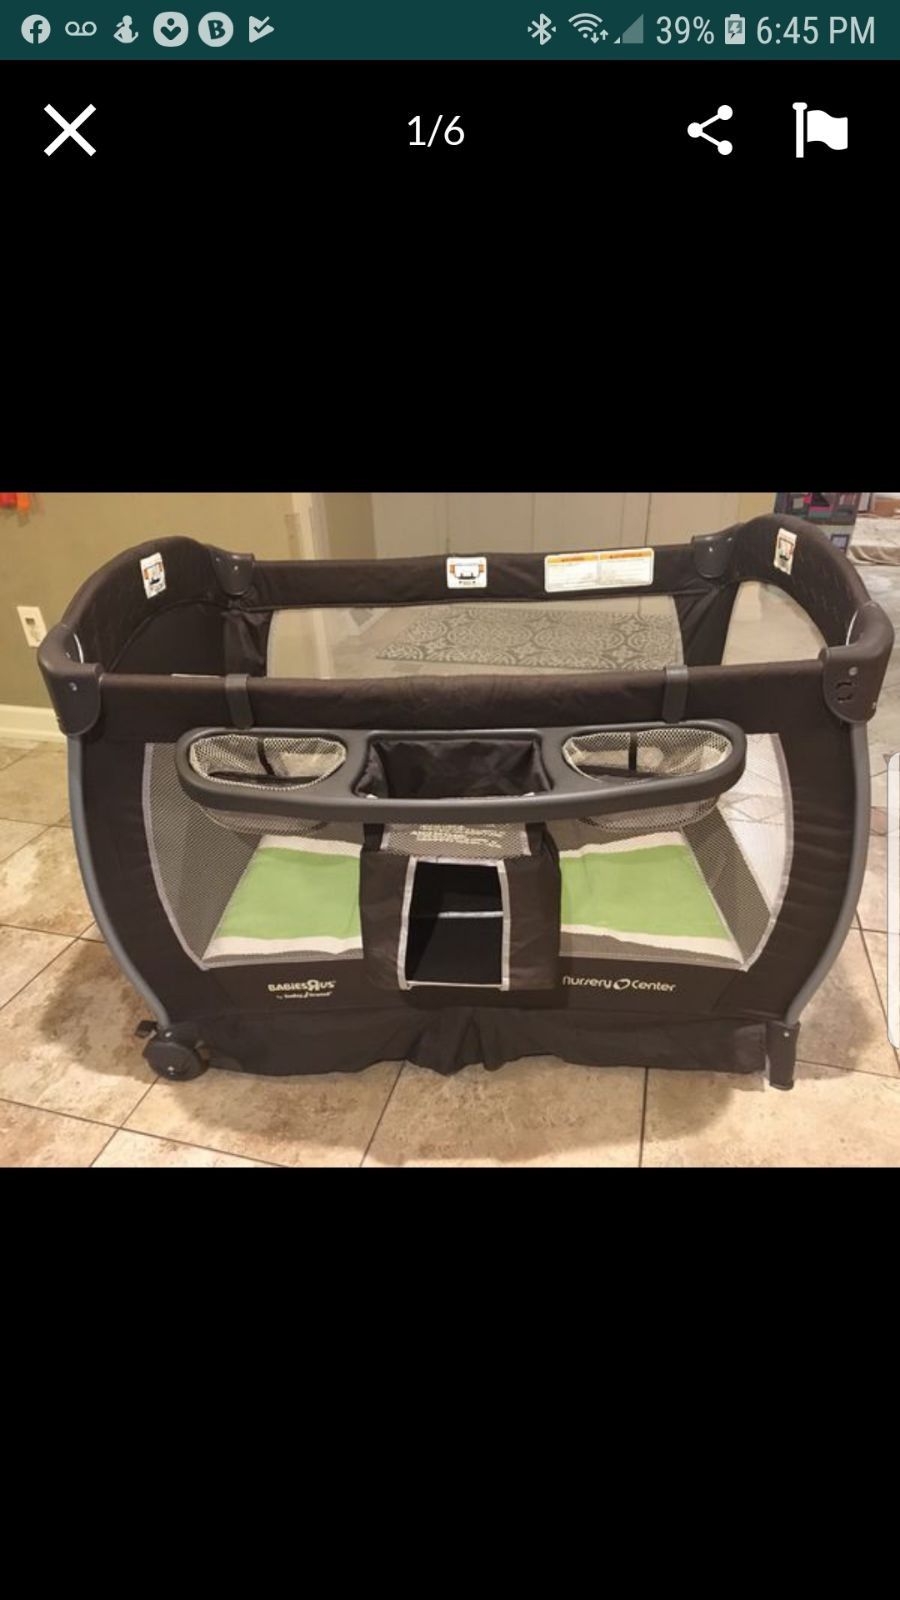 Baby Trend Nursery Center play pen, changing table